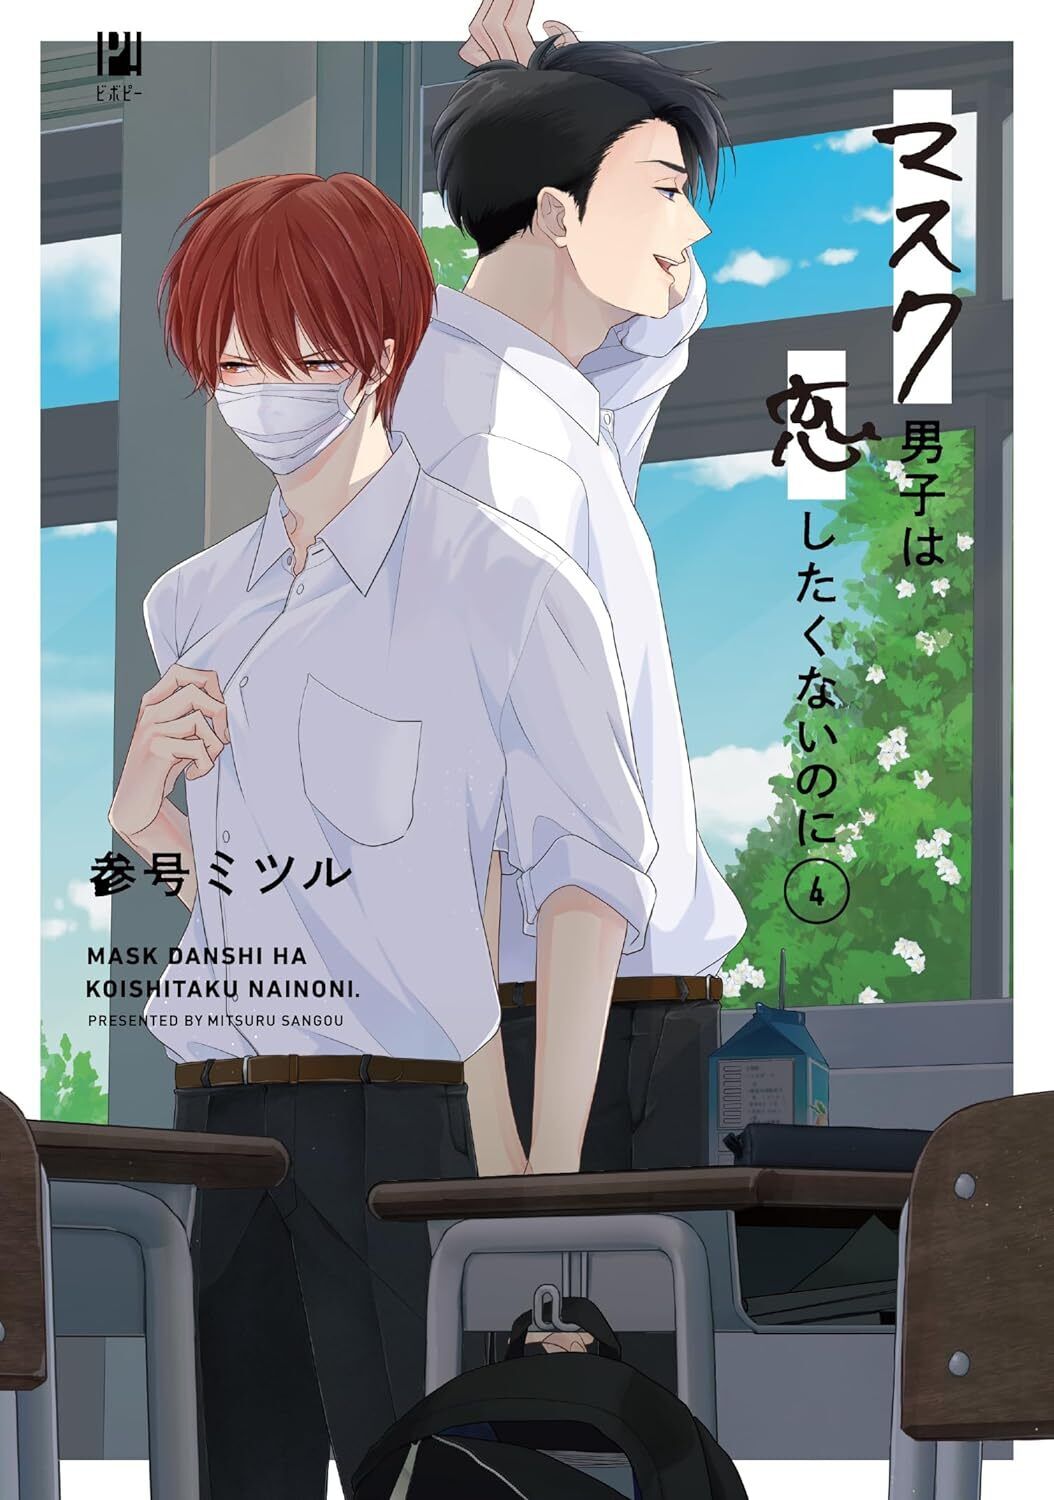 Mask Danshi This Shouldn\'t Lead to Love Vol.4 Special Edition Manga JPN Book